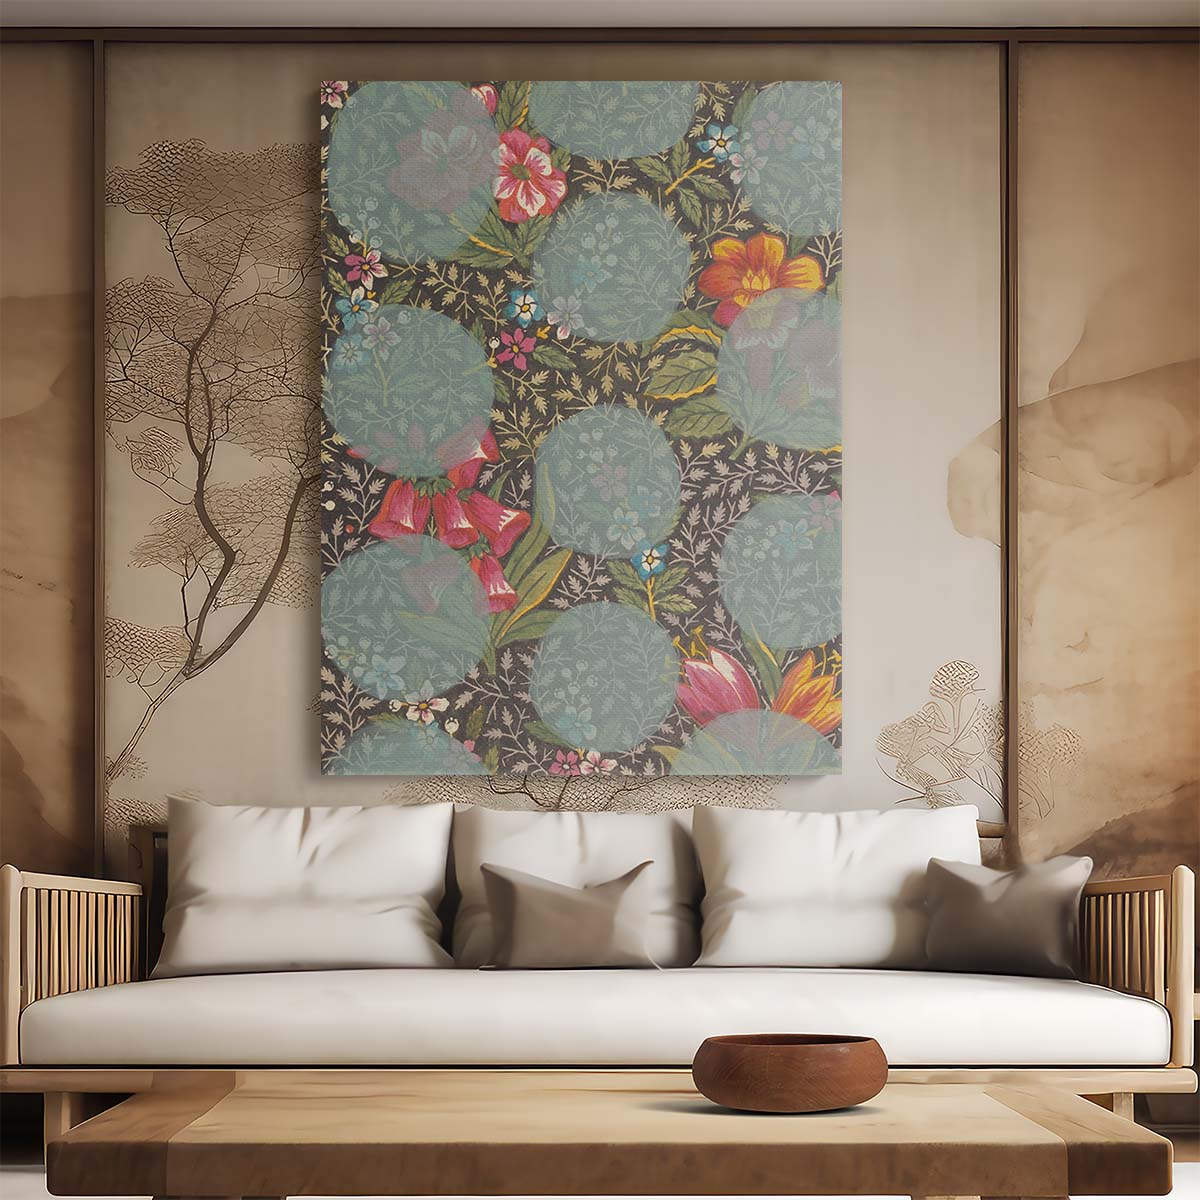 Modern Abstract Flower Collage Illustration by Yopie Studio by Luxuriance Designs, made in USA